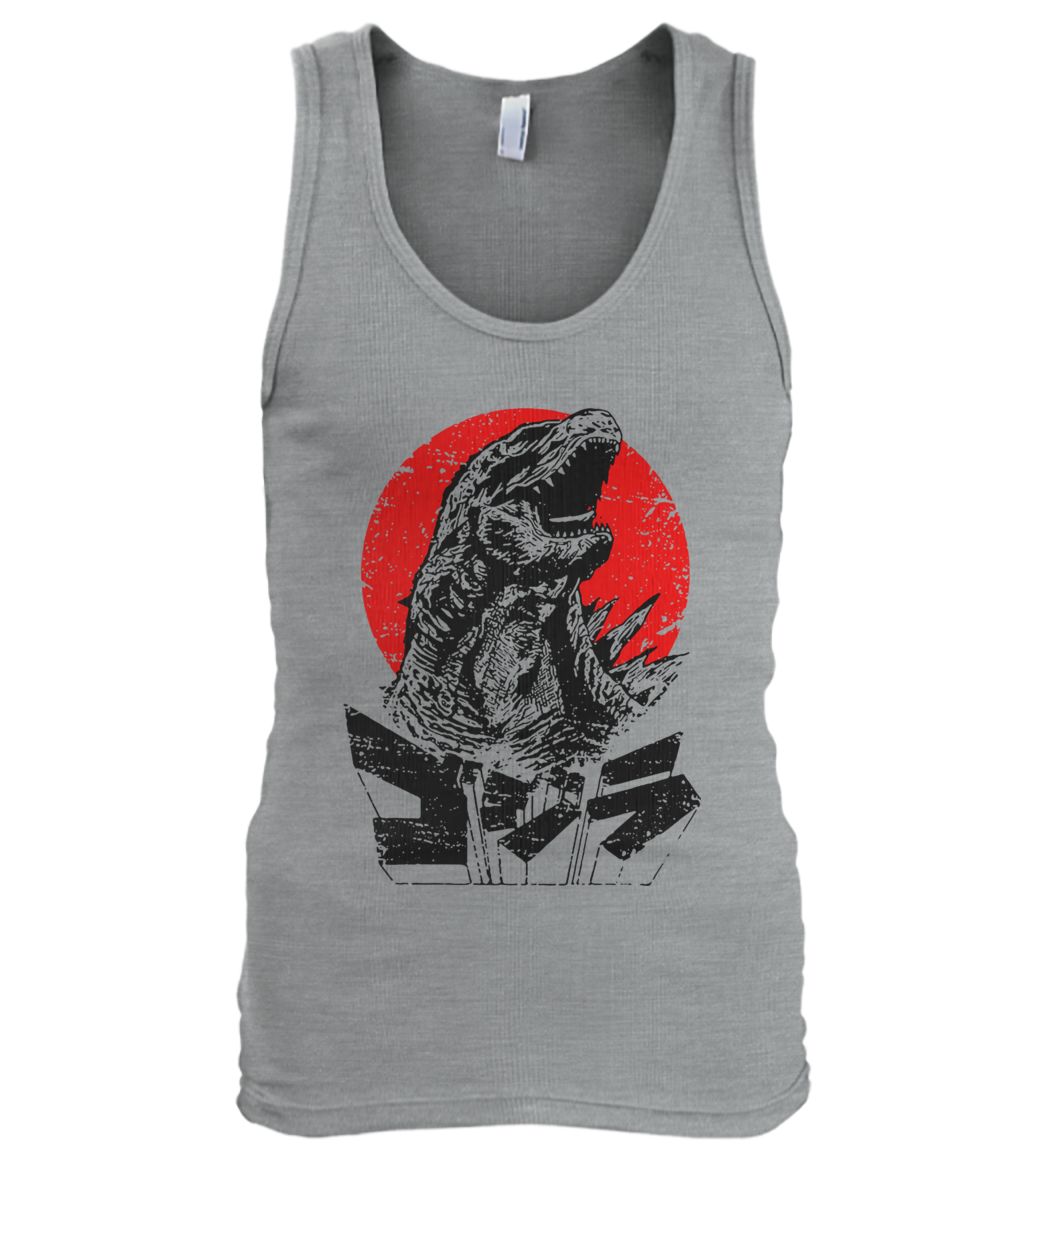 Godzilla king of the monsters men's tank top